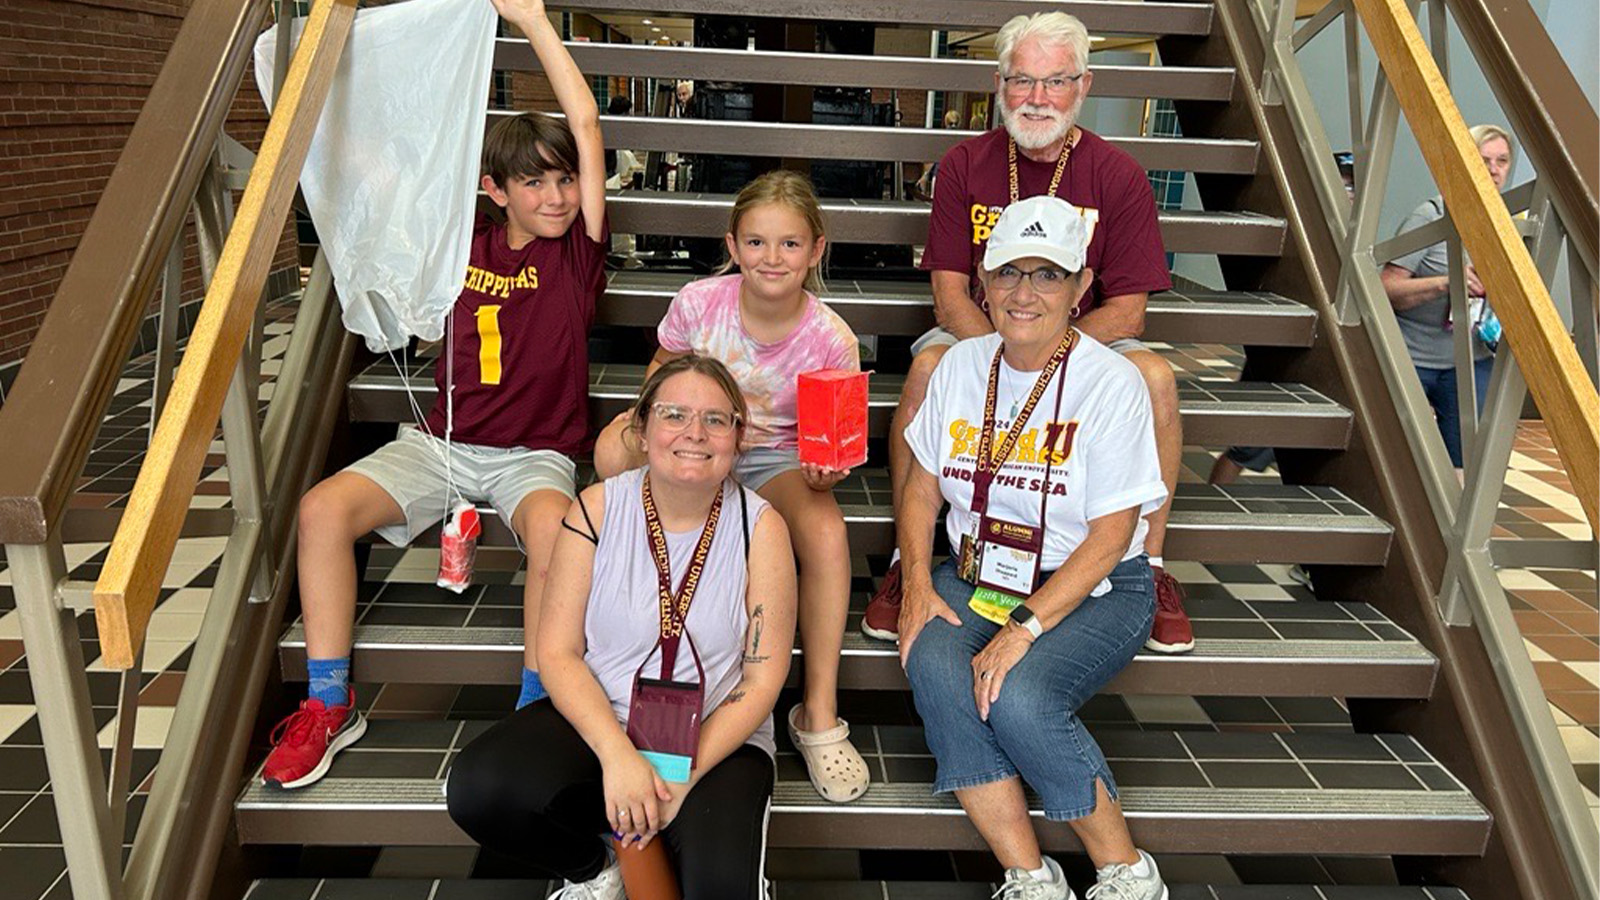 A family of five, including two grandparents and three grandchildren, sit on a staircase and smile. The boy grandchild is holding a parachute with a small red box attached to it. The girl grandchild holds a small red box.